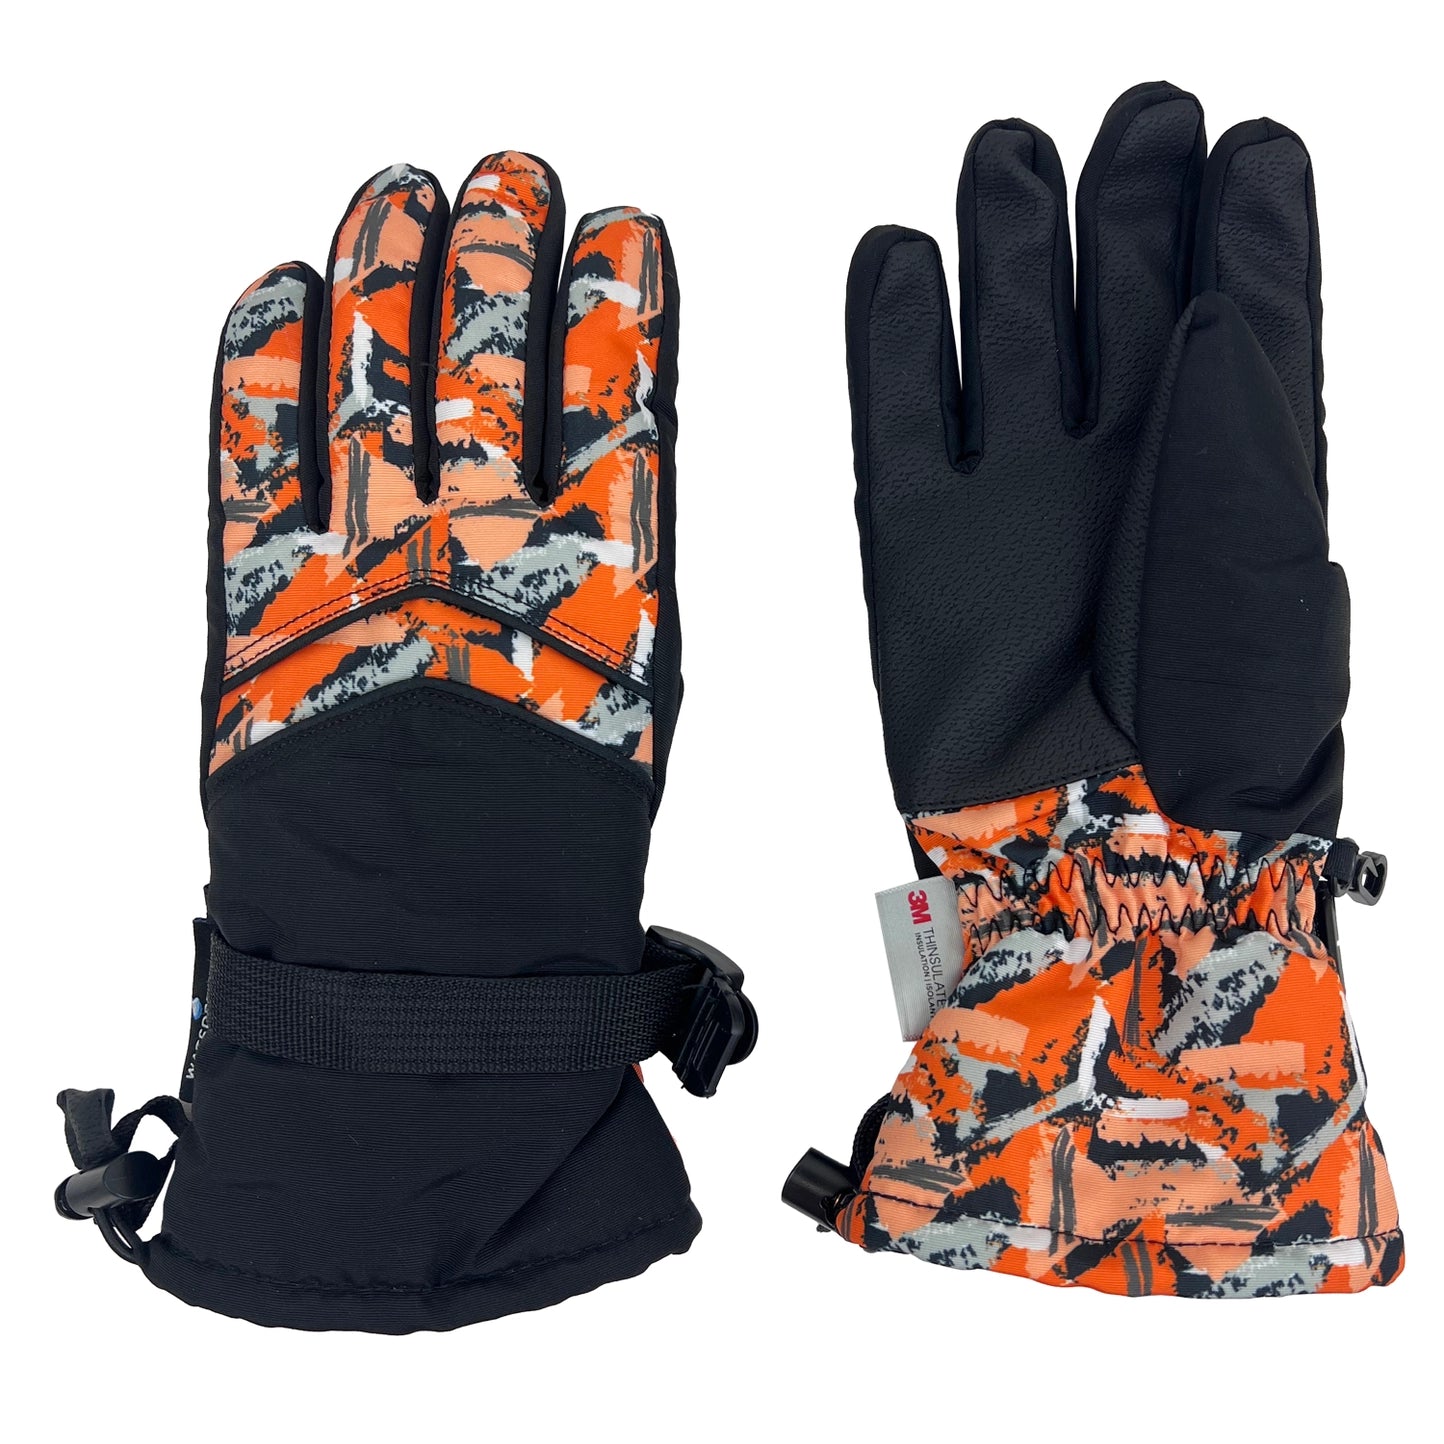 Grand Sierra Boys Printed Snowboard Glove with Thinsulate (Size 4-7)